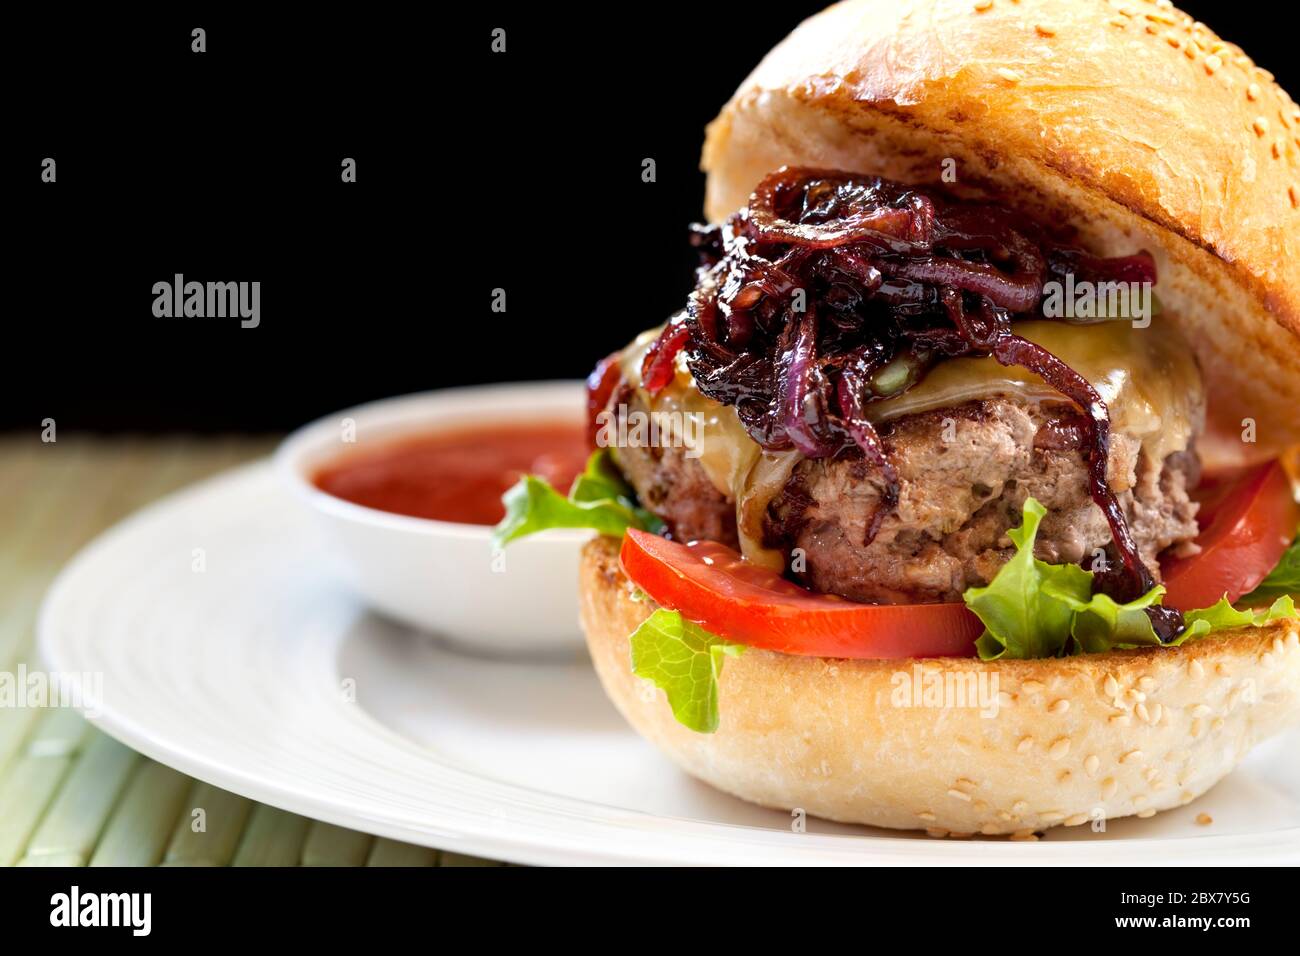 Healthy hamburger.  Lean meat with salad, tomatoes, low-fat cheese and caramellised onions. Stock Photo